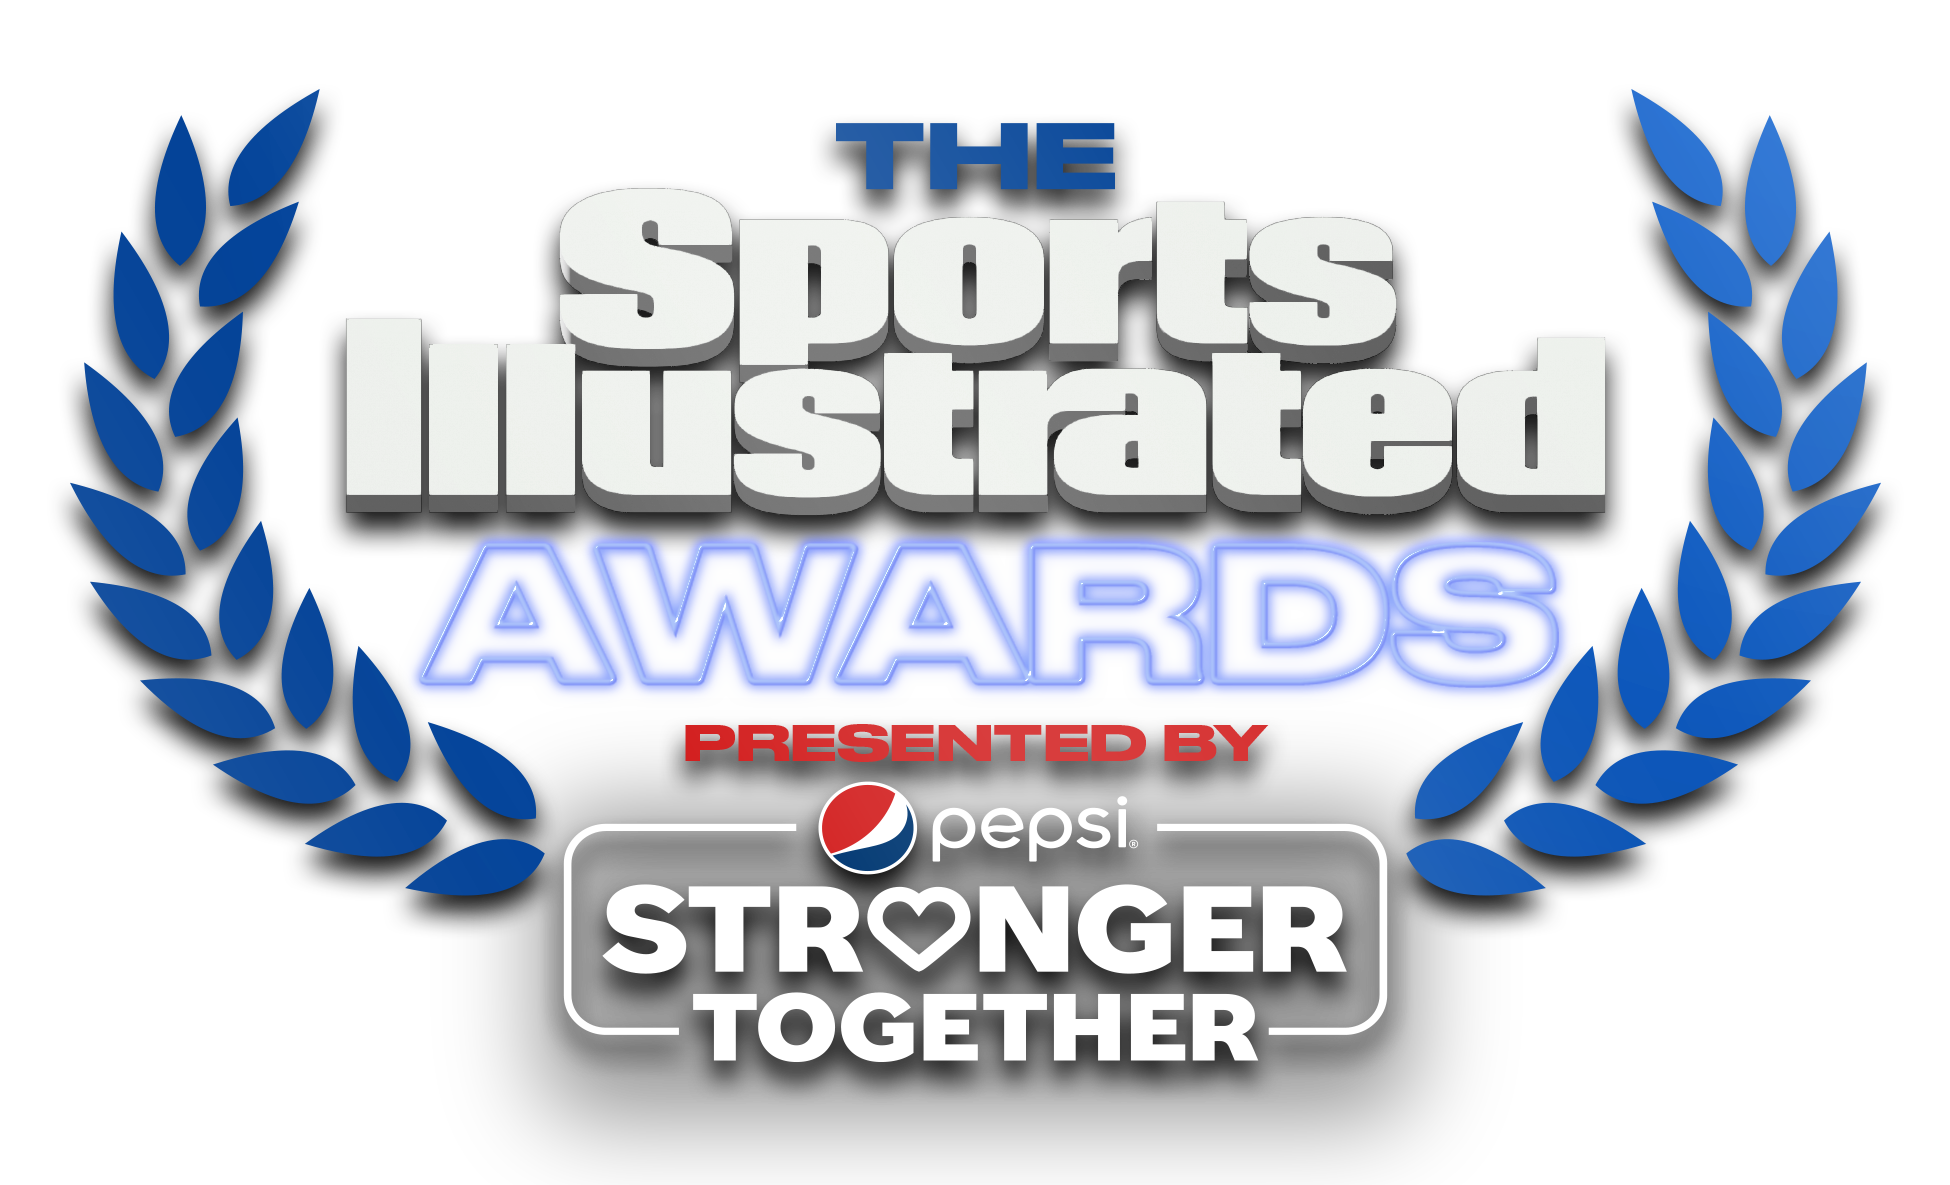 The 21 Sports Illustrated Awards Presented By Pepsi Stronger Together Announces Tom Brady As 21 Sportsperson Of The Year Presented By Ftx Newswire